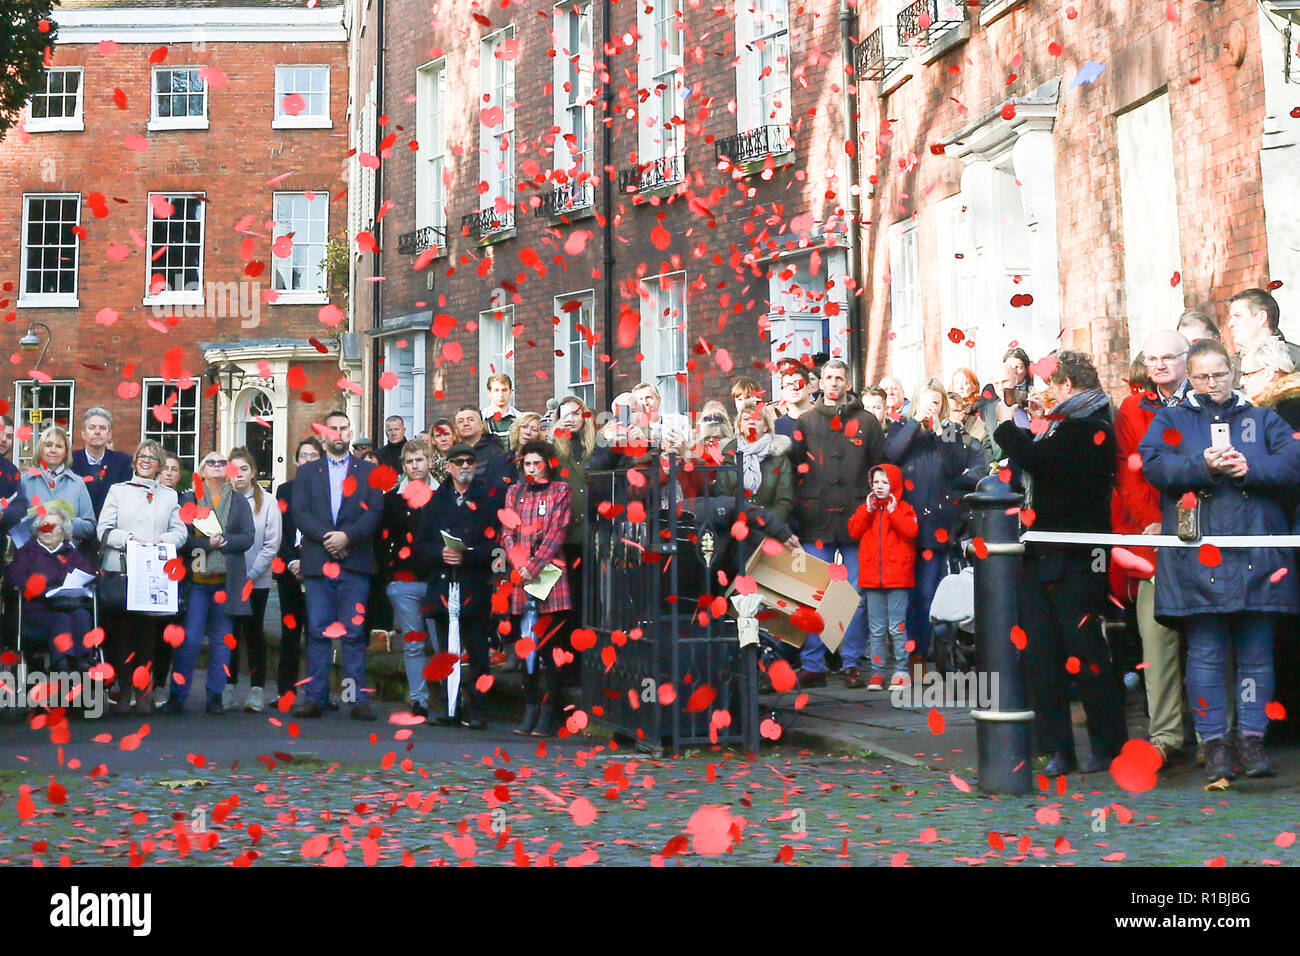 Worcester, UK. 11th November, 2018. The end of the First World War is commemorated at Worcester Cathedral. A canon blast of thousands of poppies. Peter Lopeman/Alamy Live News Stock Photo